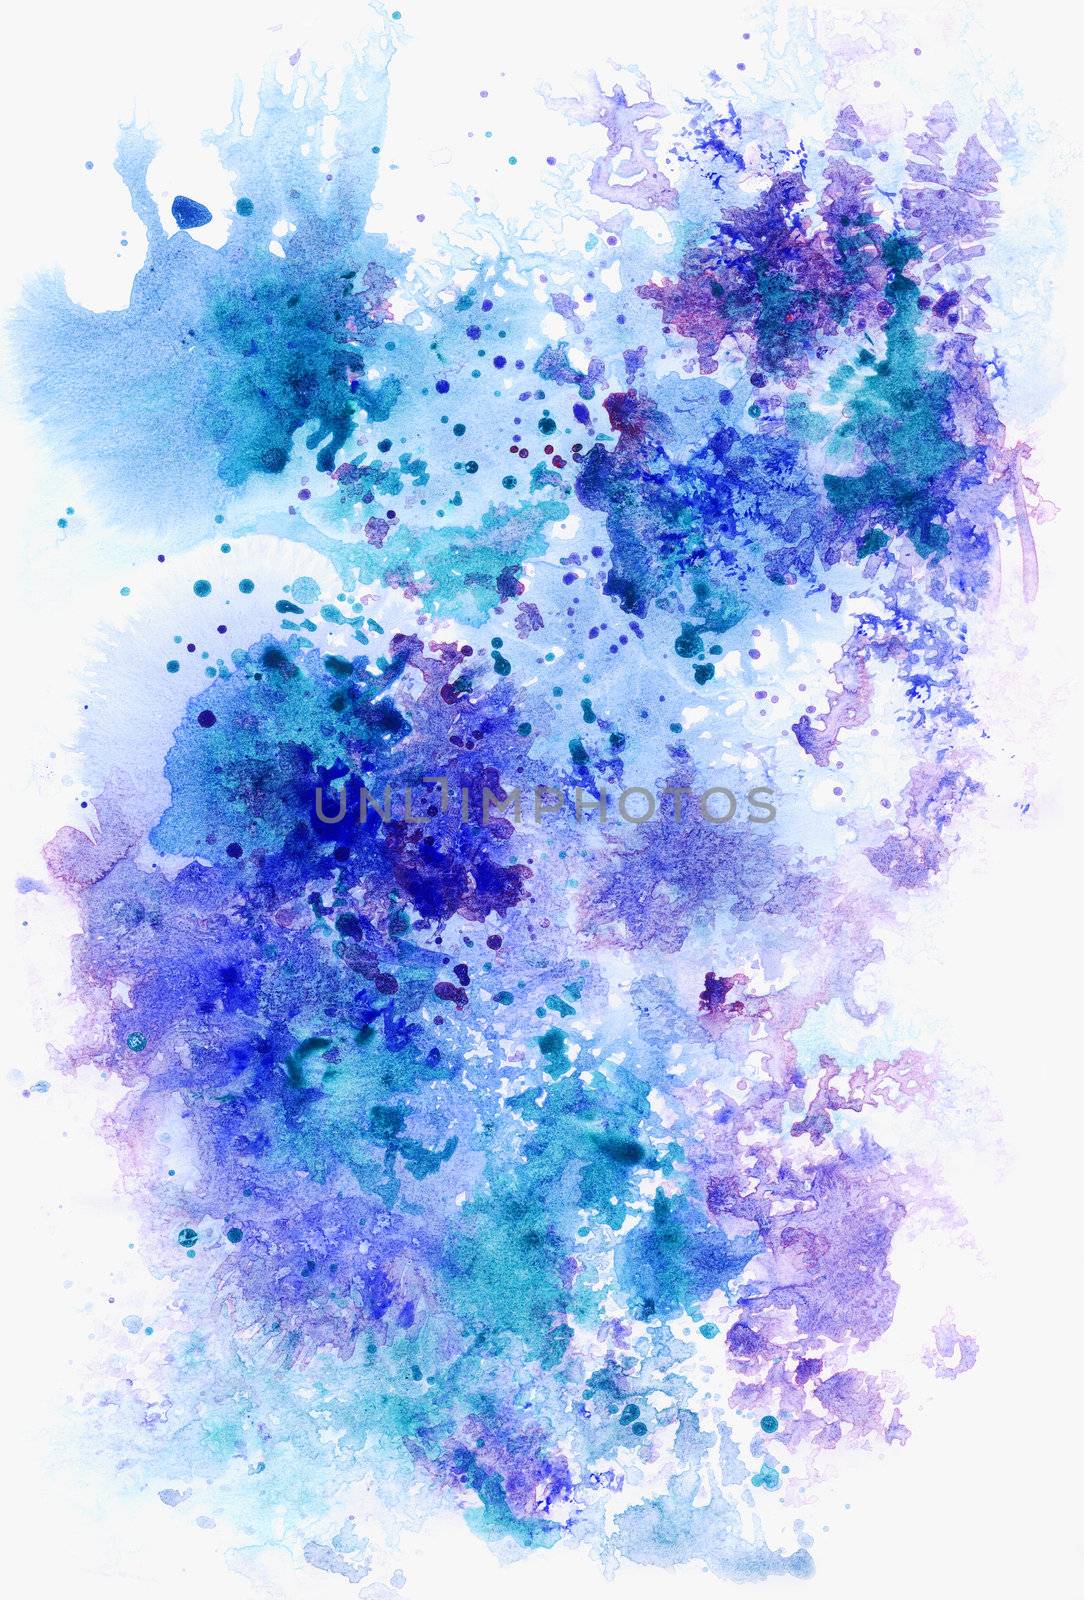 Abstract background, watercolor, hand painted on a paper. White, blue, violet